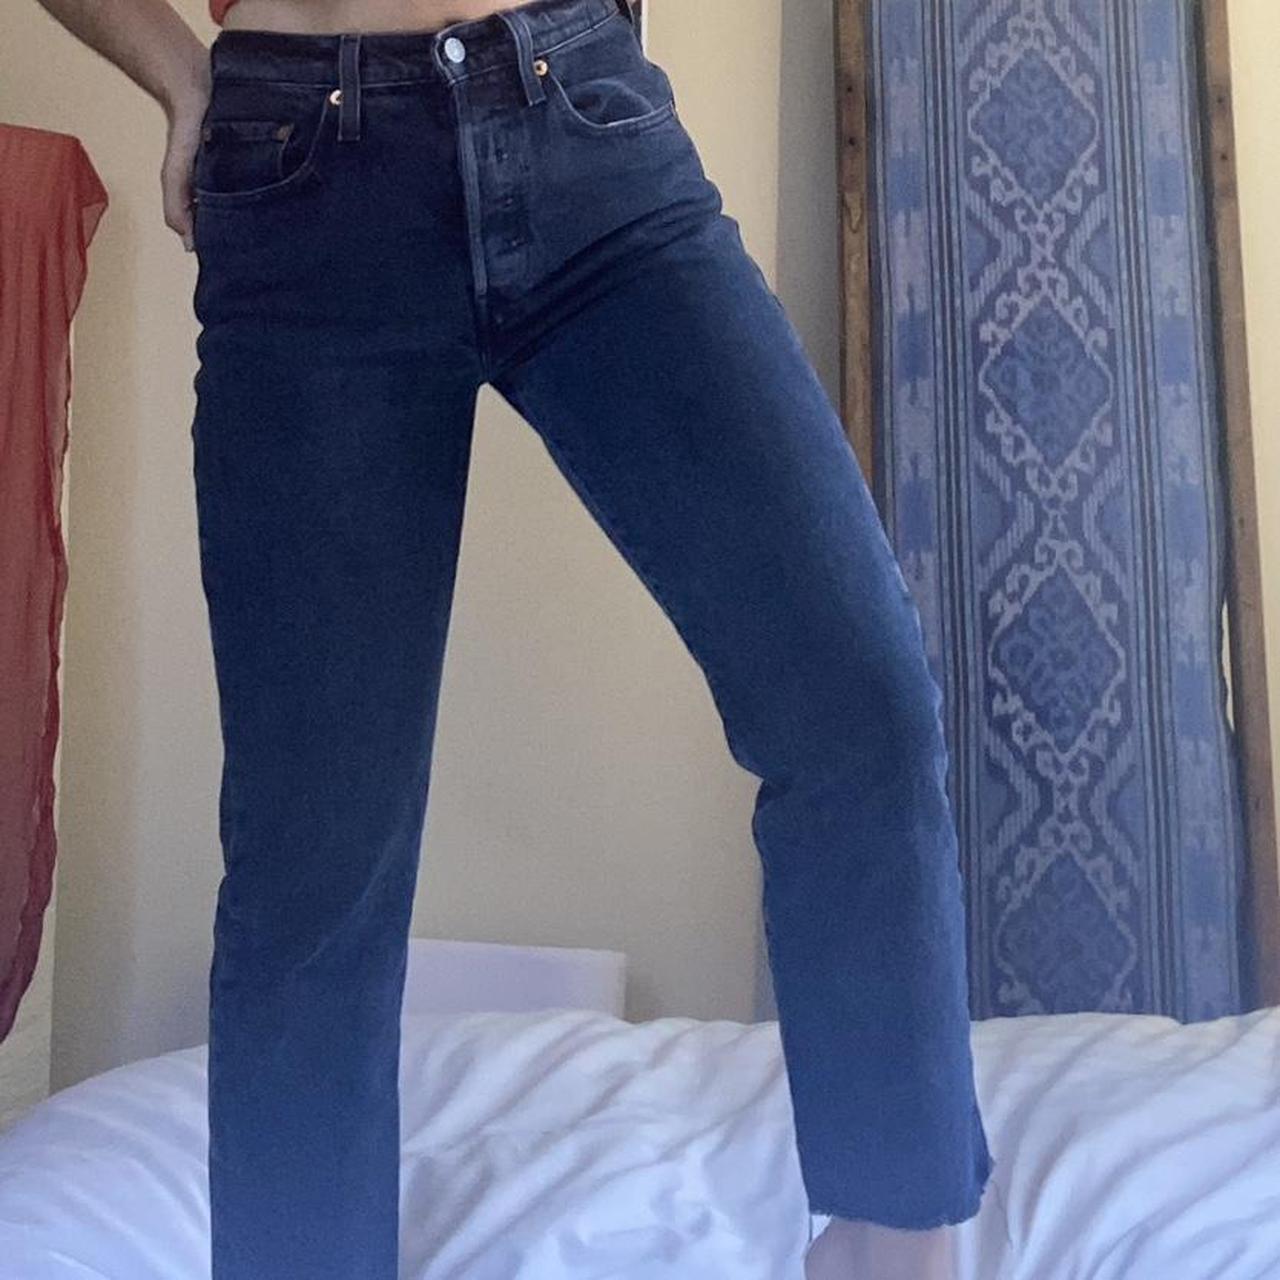 ️‍🔥Rare washed out navy 501s Levi’s ️‍🔥 Such a good... - Depop